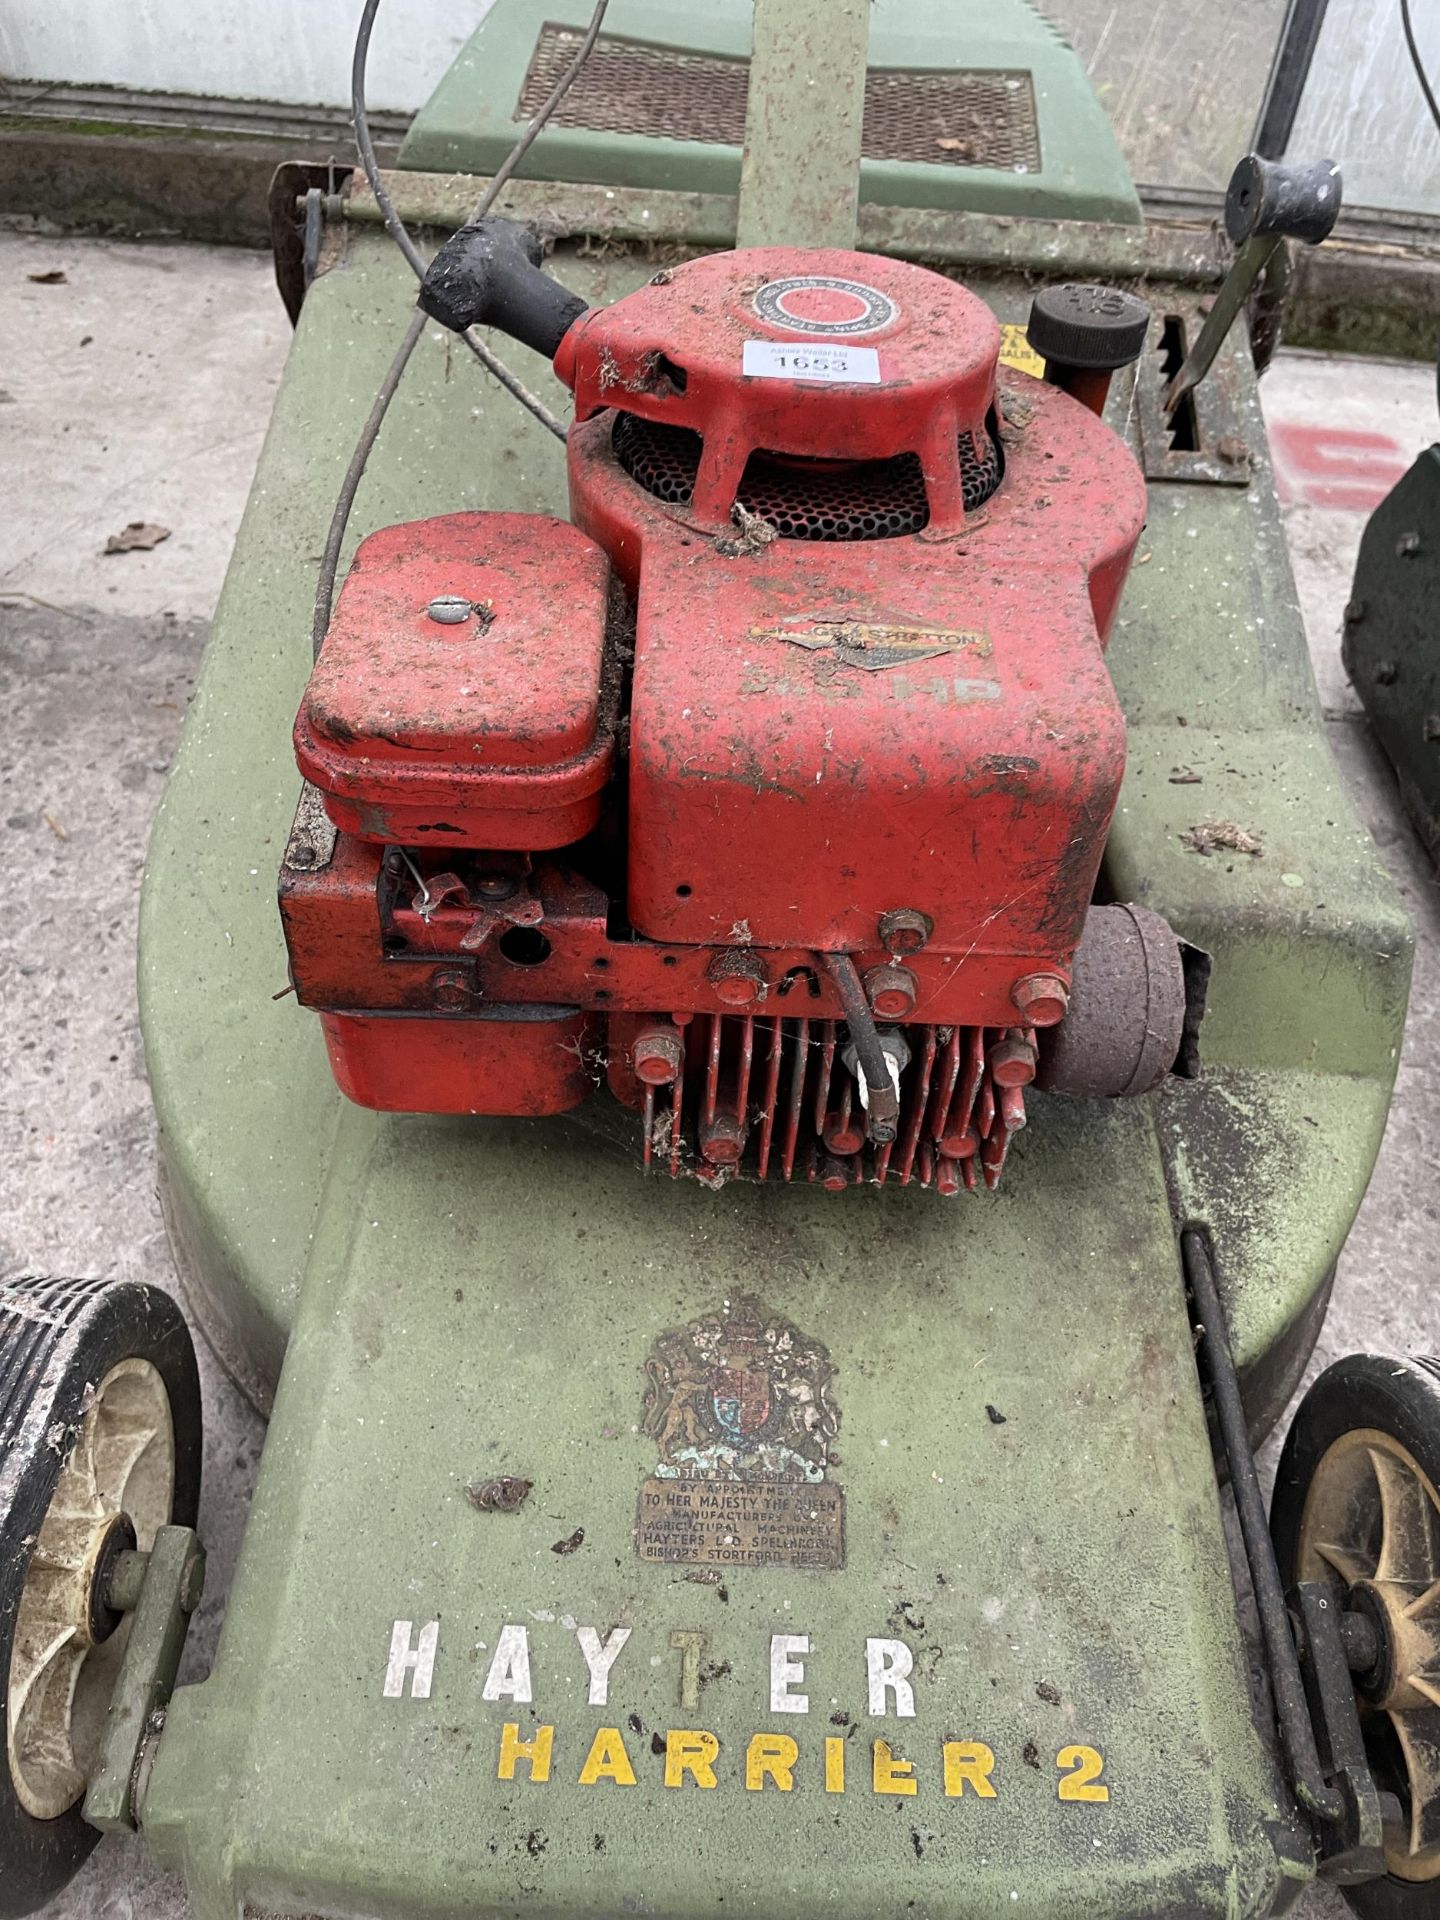 A VINTAGE HAYTER HARRIER ROTARY MOWER COMPLETE WITH GRASS BOX - Image 3 of 5